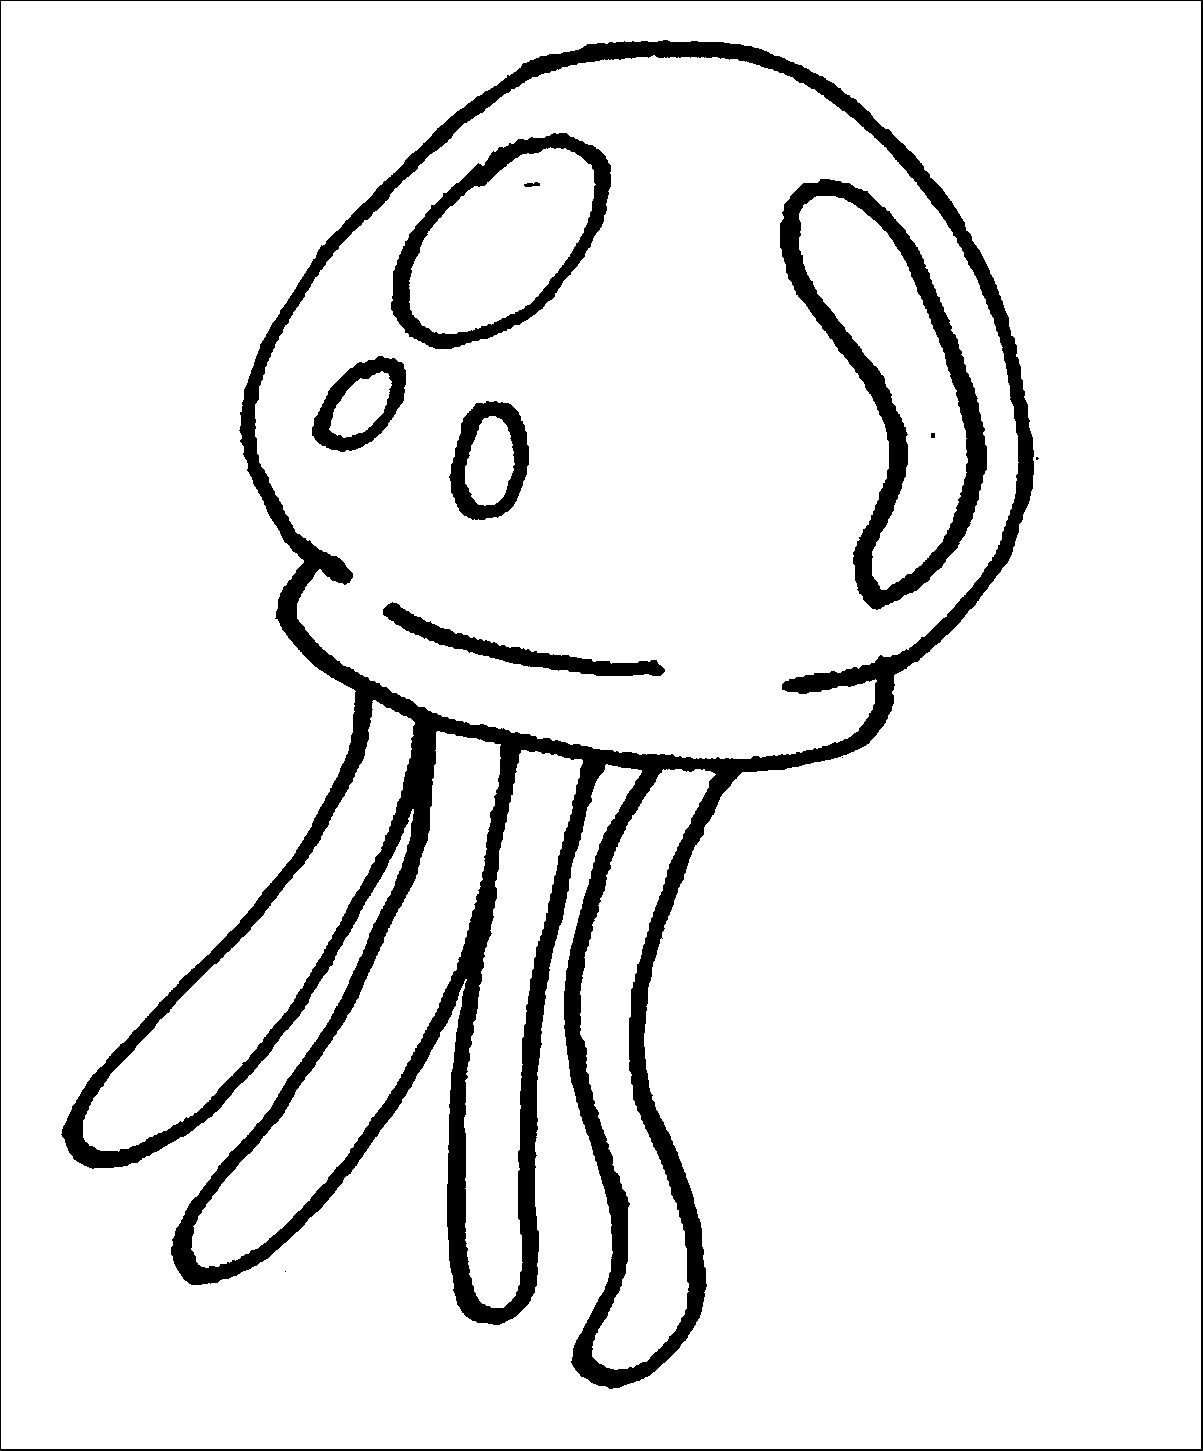 The best free Jellyfish coloring page images. Download from 245 free